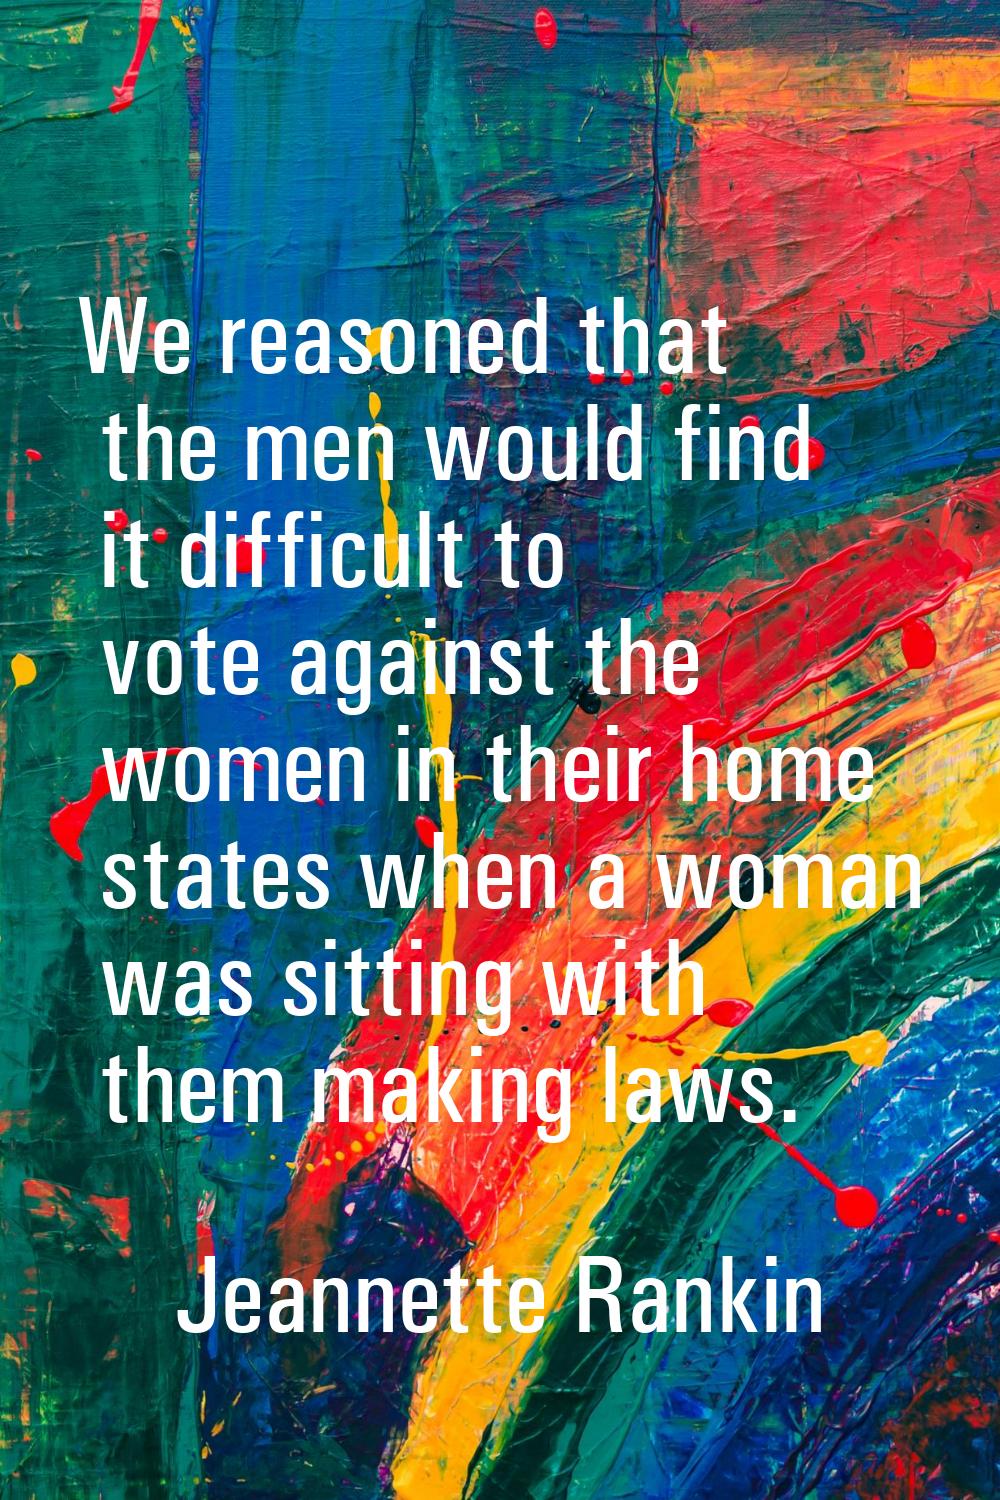 We reasoned that the men would find it difficult to vote against the women in their home states whe